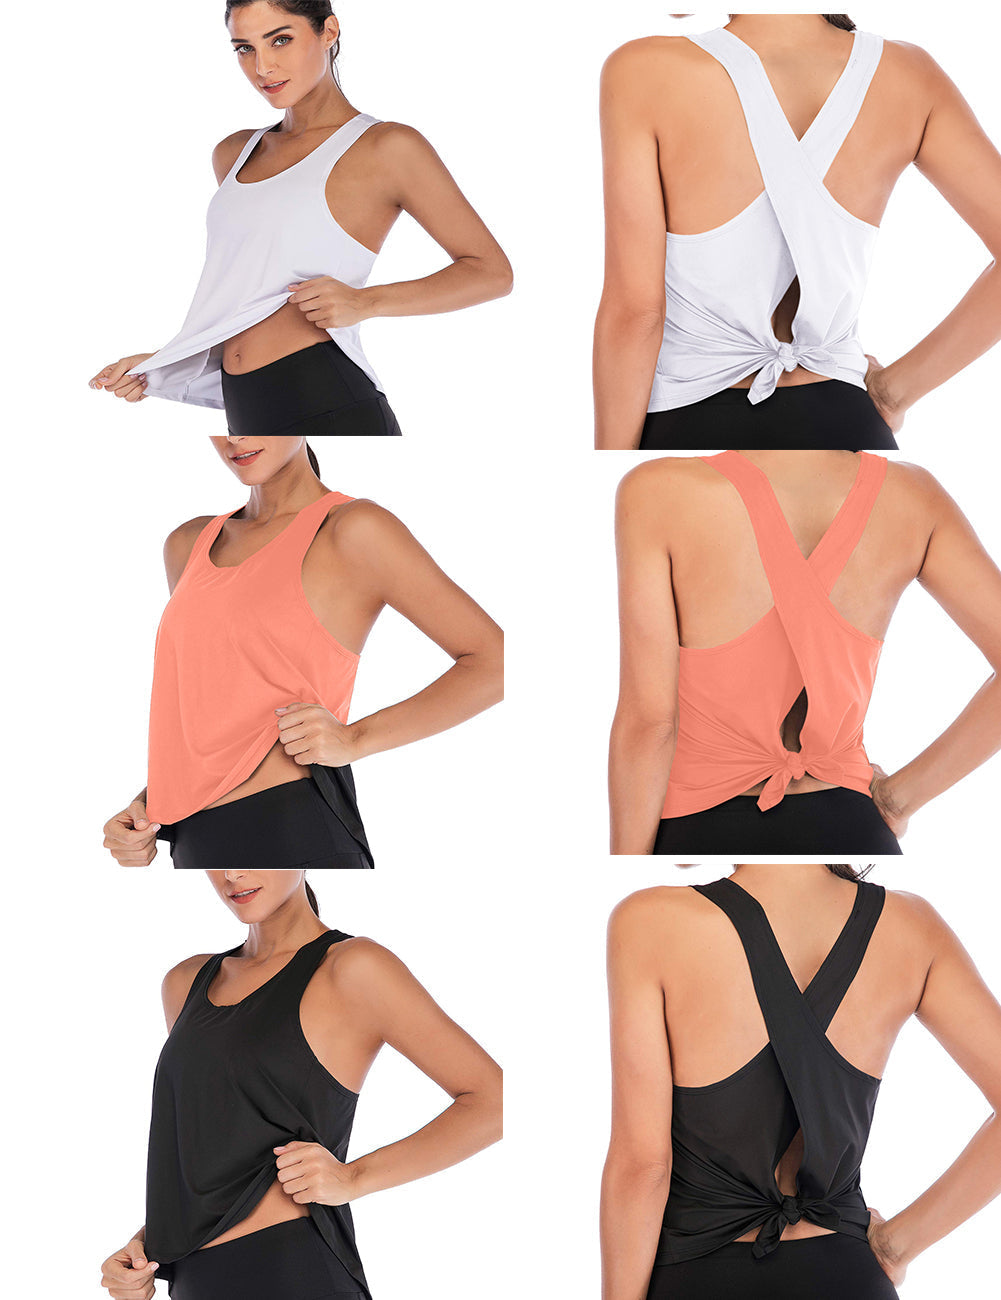  Mippo Workout Tops for Women Summer Yoga Exercise Shirts  Sleeveless Tanks Gym Exercise Clothes High Neck Racerback Tank Tops Athleta  Clothing for Women Black XS : Clothing, Shoes & Jewelry